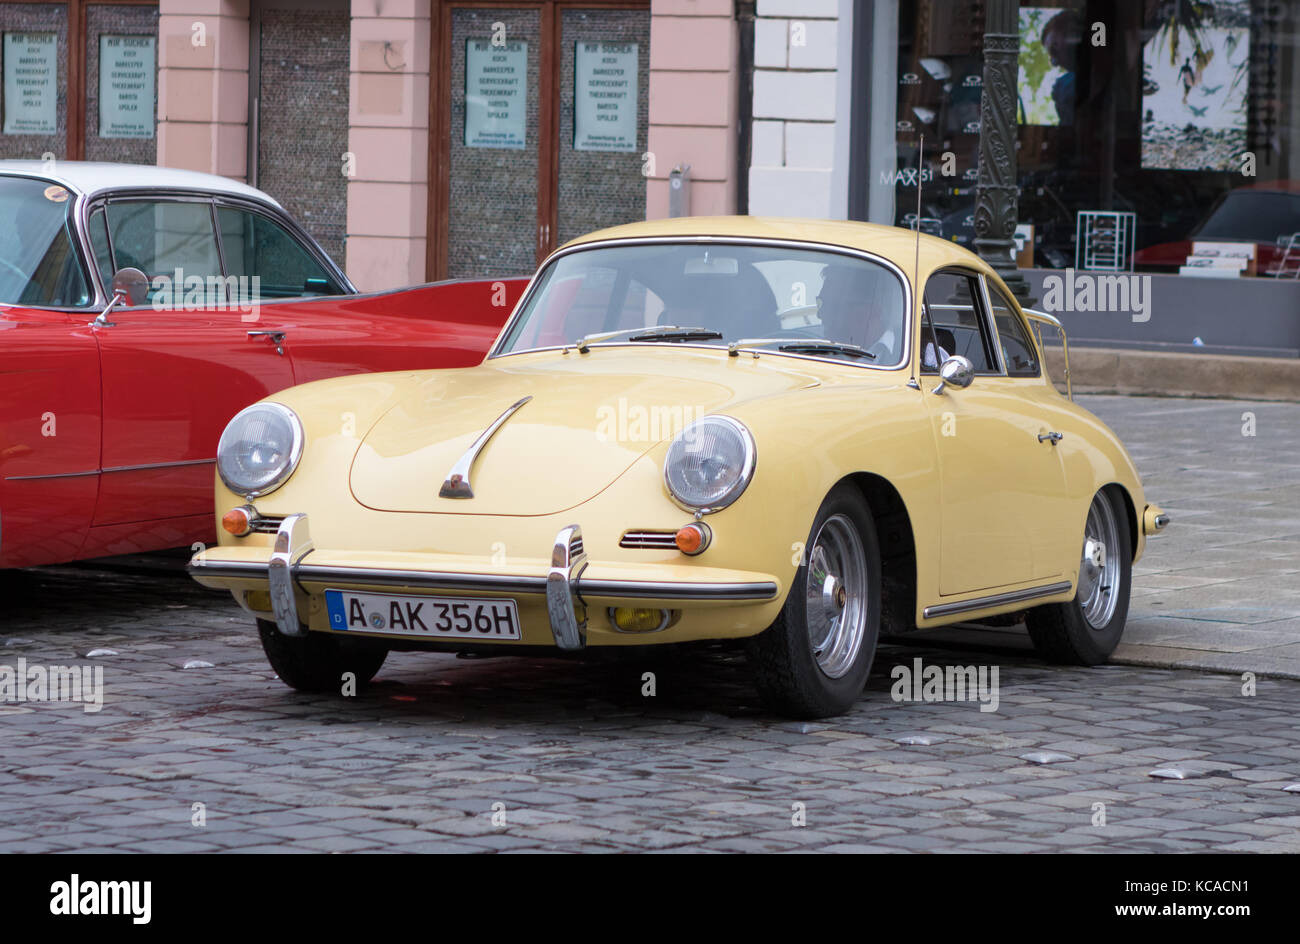 Augsburg, Germany - October 1, 2017: Porsche 356 oldtimer car at the Fuggerstadt Classic 2017 Oldtimer Rallye on October 1, 2017 in Augsburg, Germany. Stock Photo